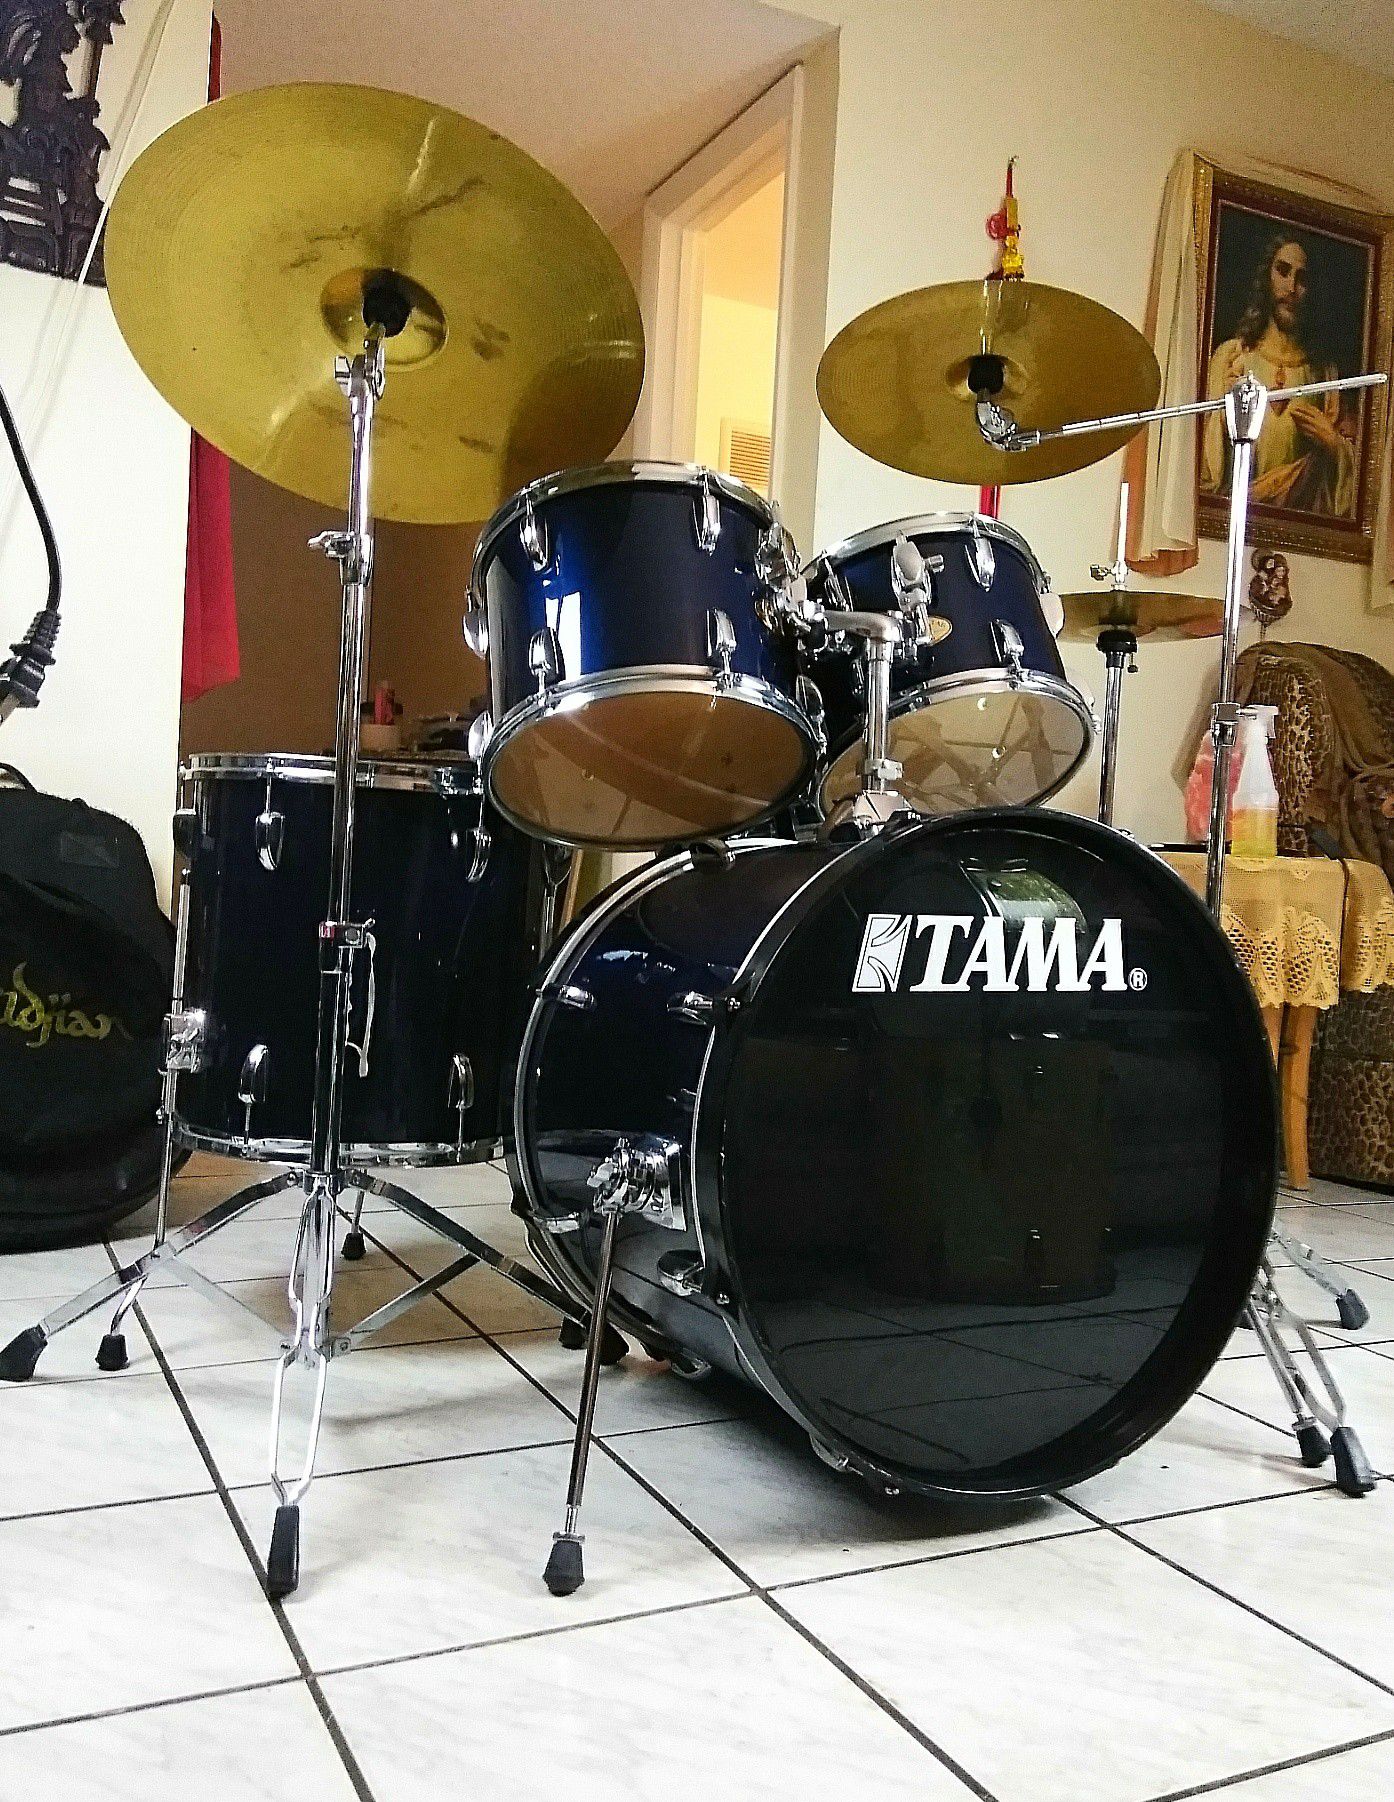 Tama complete drum set !! Like new !! $380 or best offer. !!